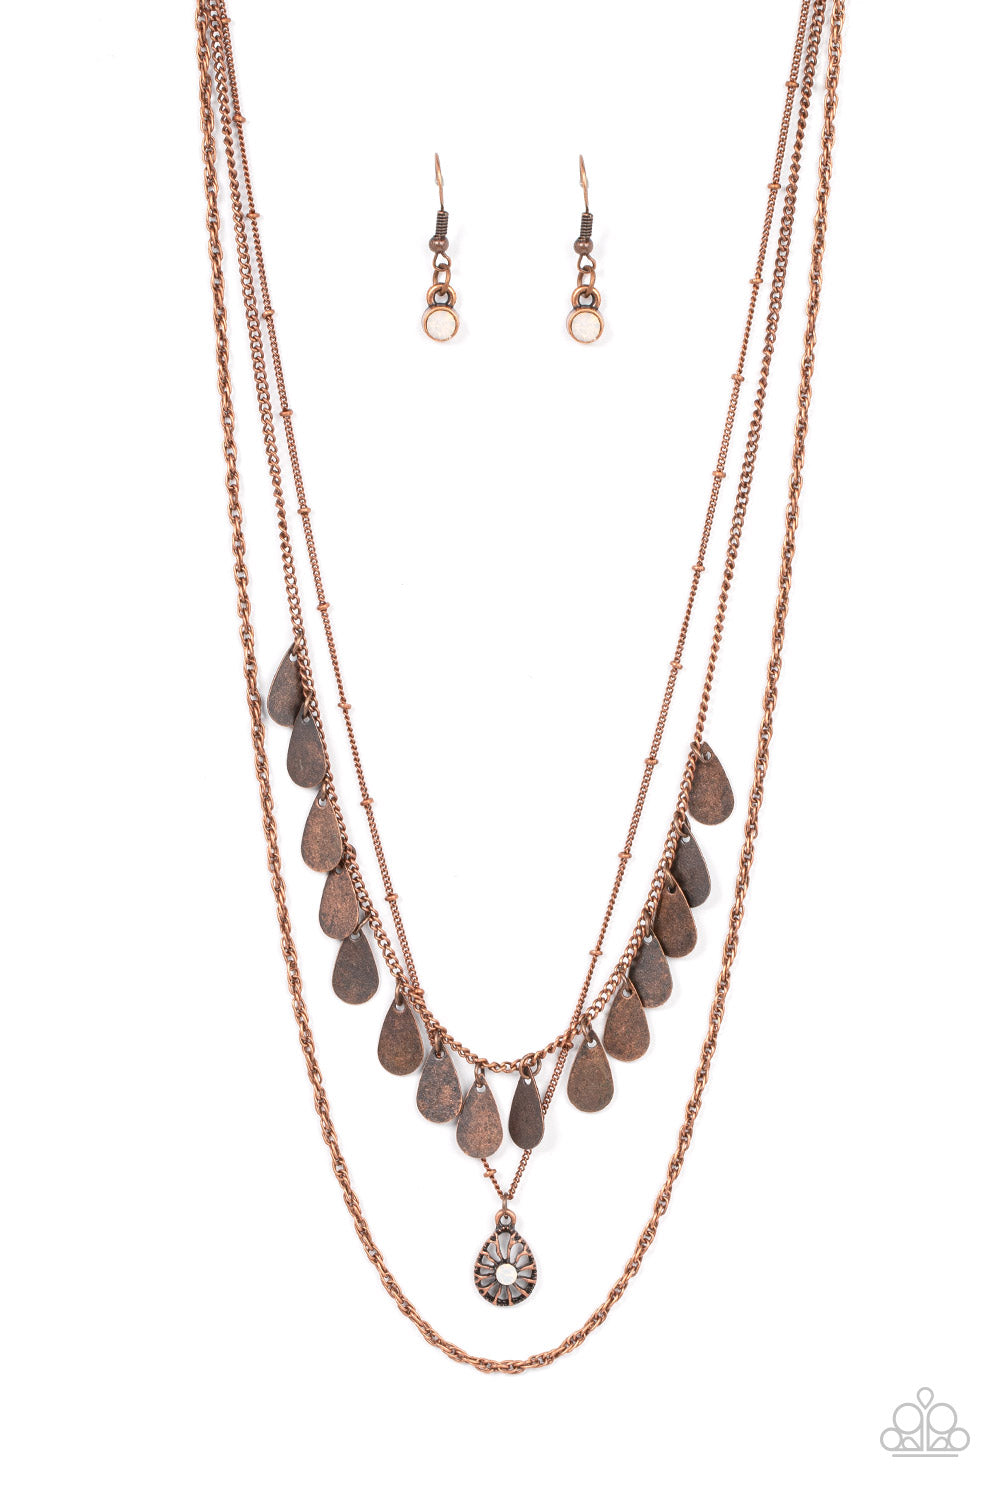 Prairie Dream Paparazzi Accessories Necklace with Earrings Copper